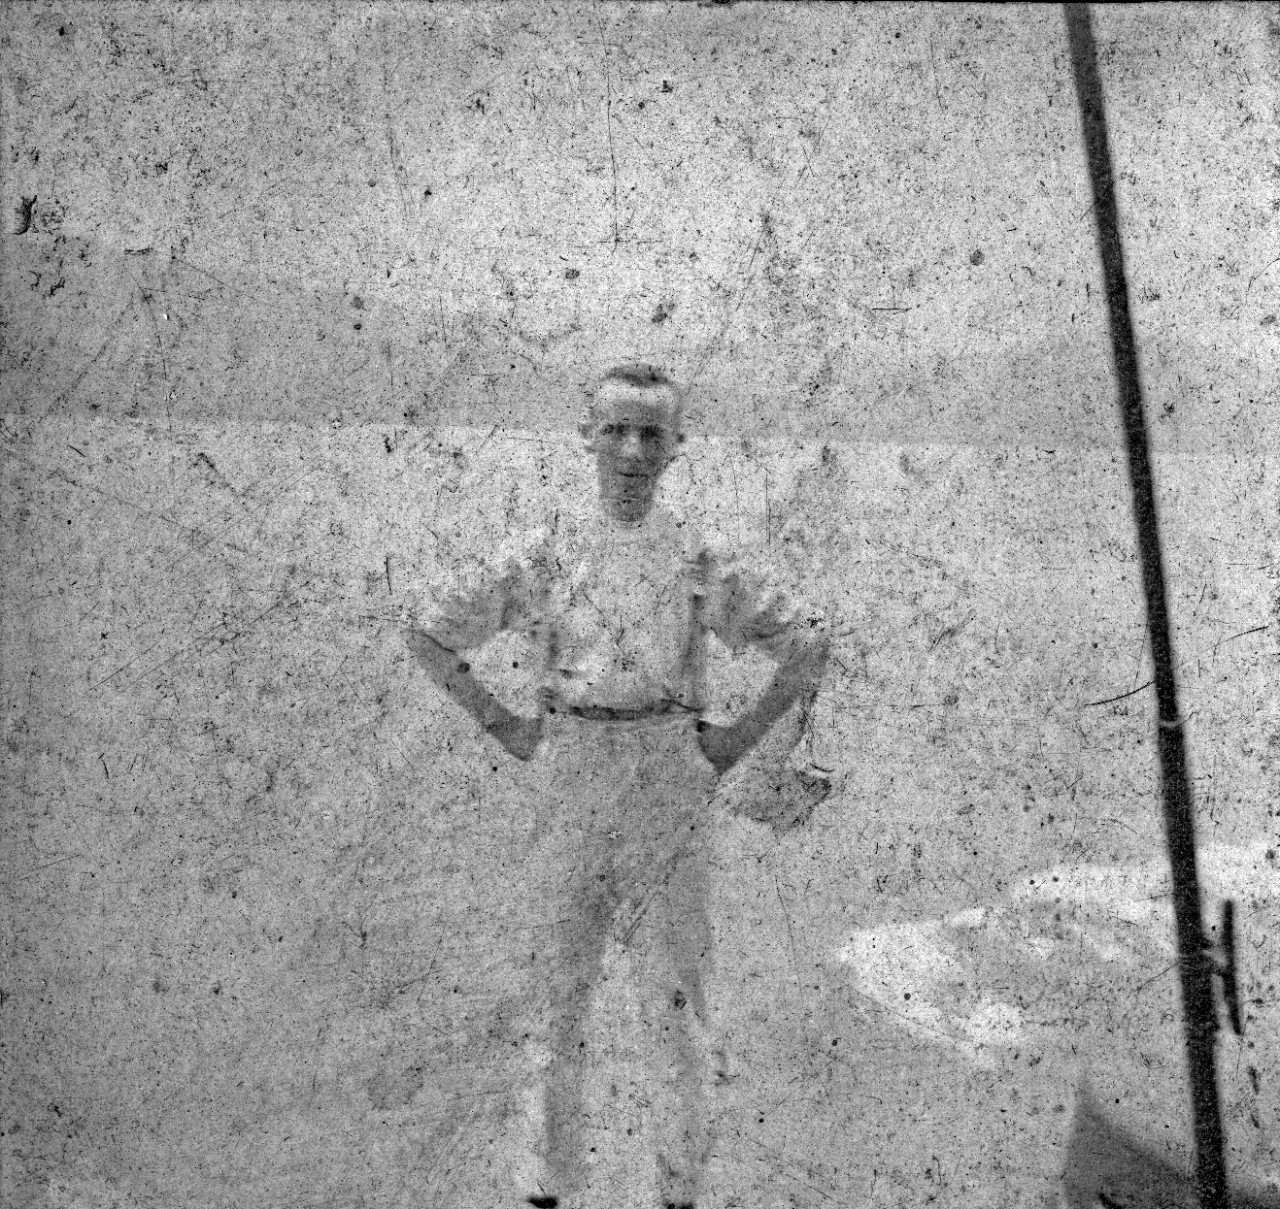 Cyrus R. Miller Collection This collection consists of 69 photographs and a group of 12 radio messages, and deals with Cyrus R. Miller’s career in the United States Navy, from USNA Annapolis to Commander of USS VON STEUBEN (SP-3017) during WW I. Some images have been assigned NH numbers or removed and added to the NH series. Messages transferred to Navy Department Library.